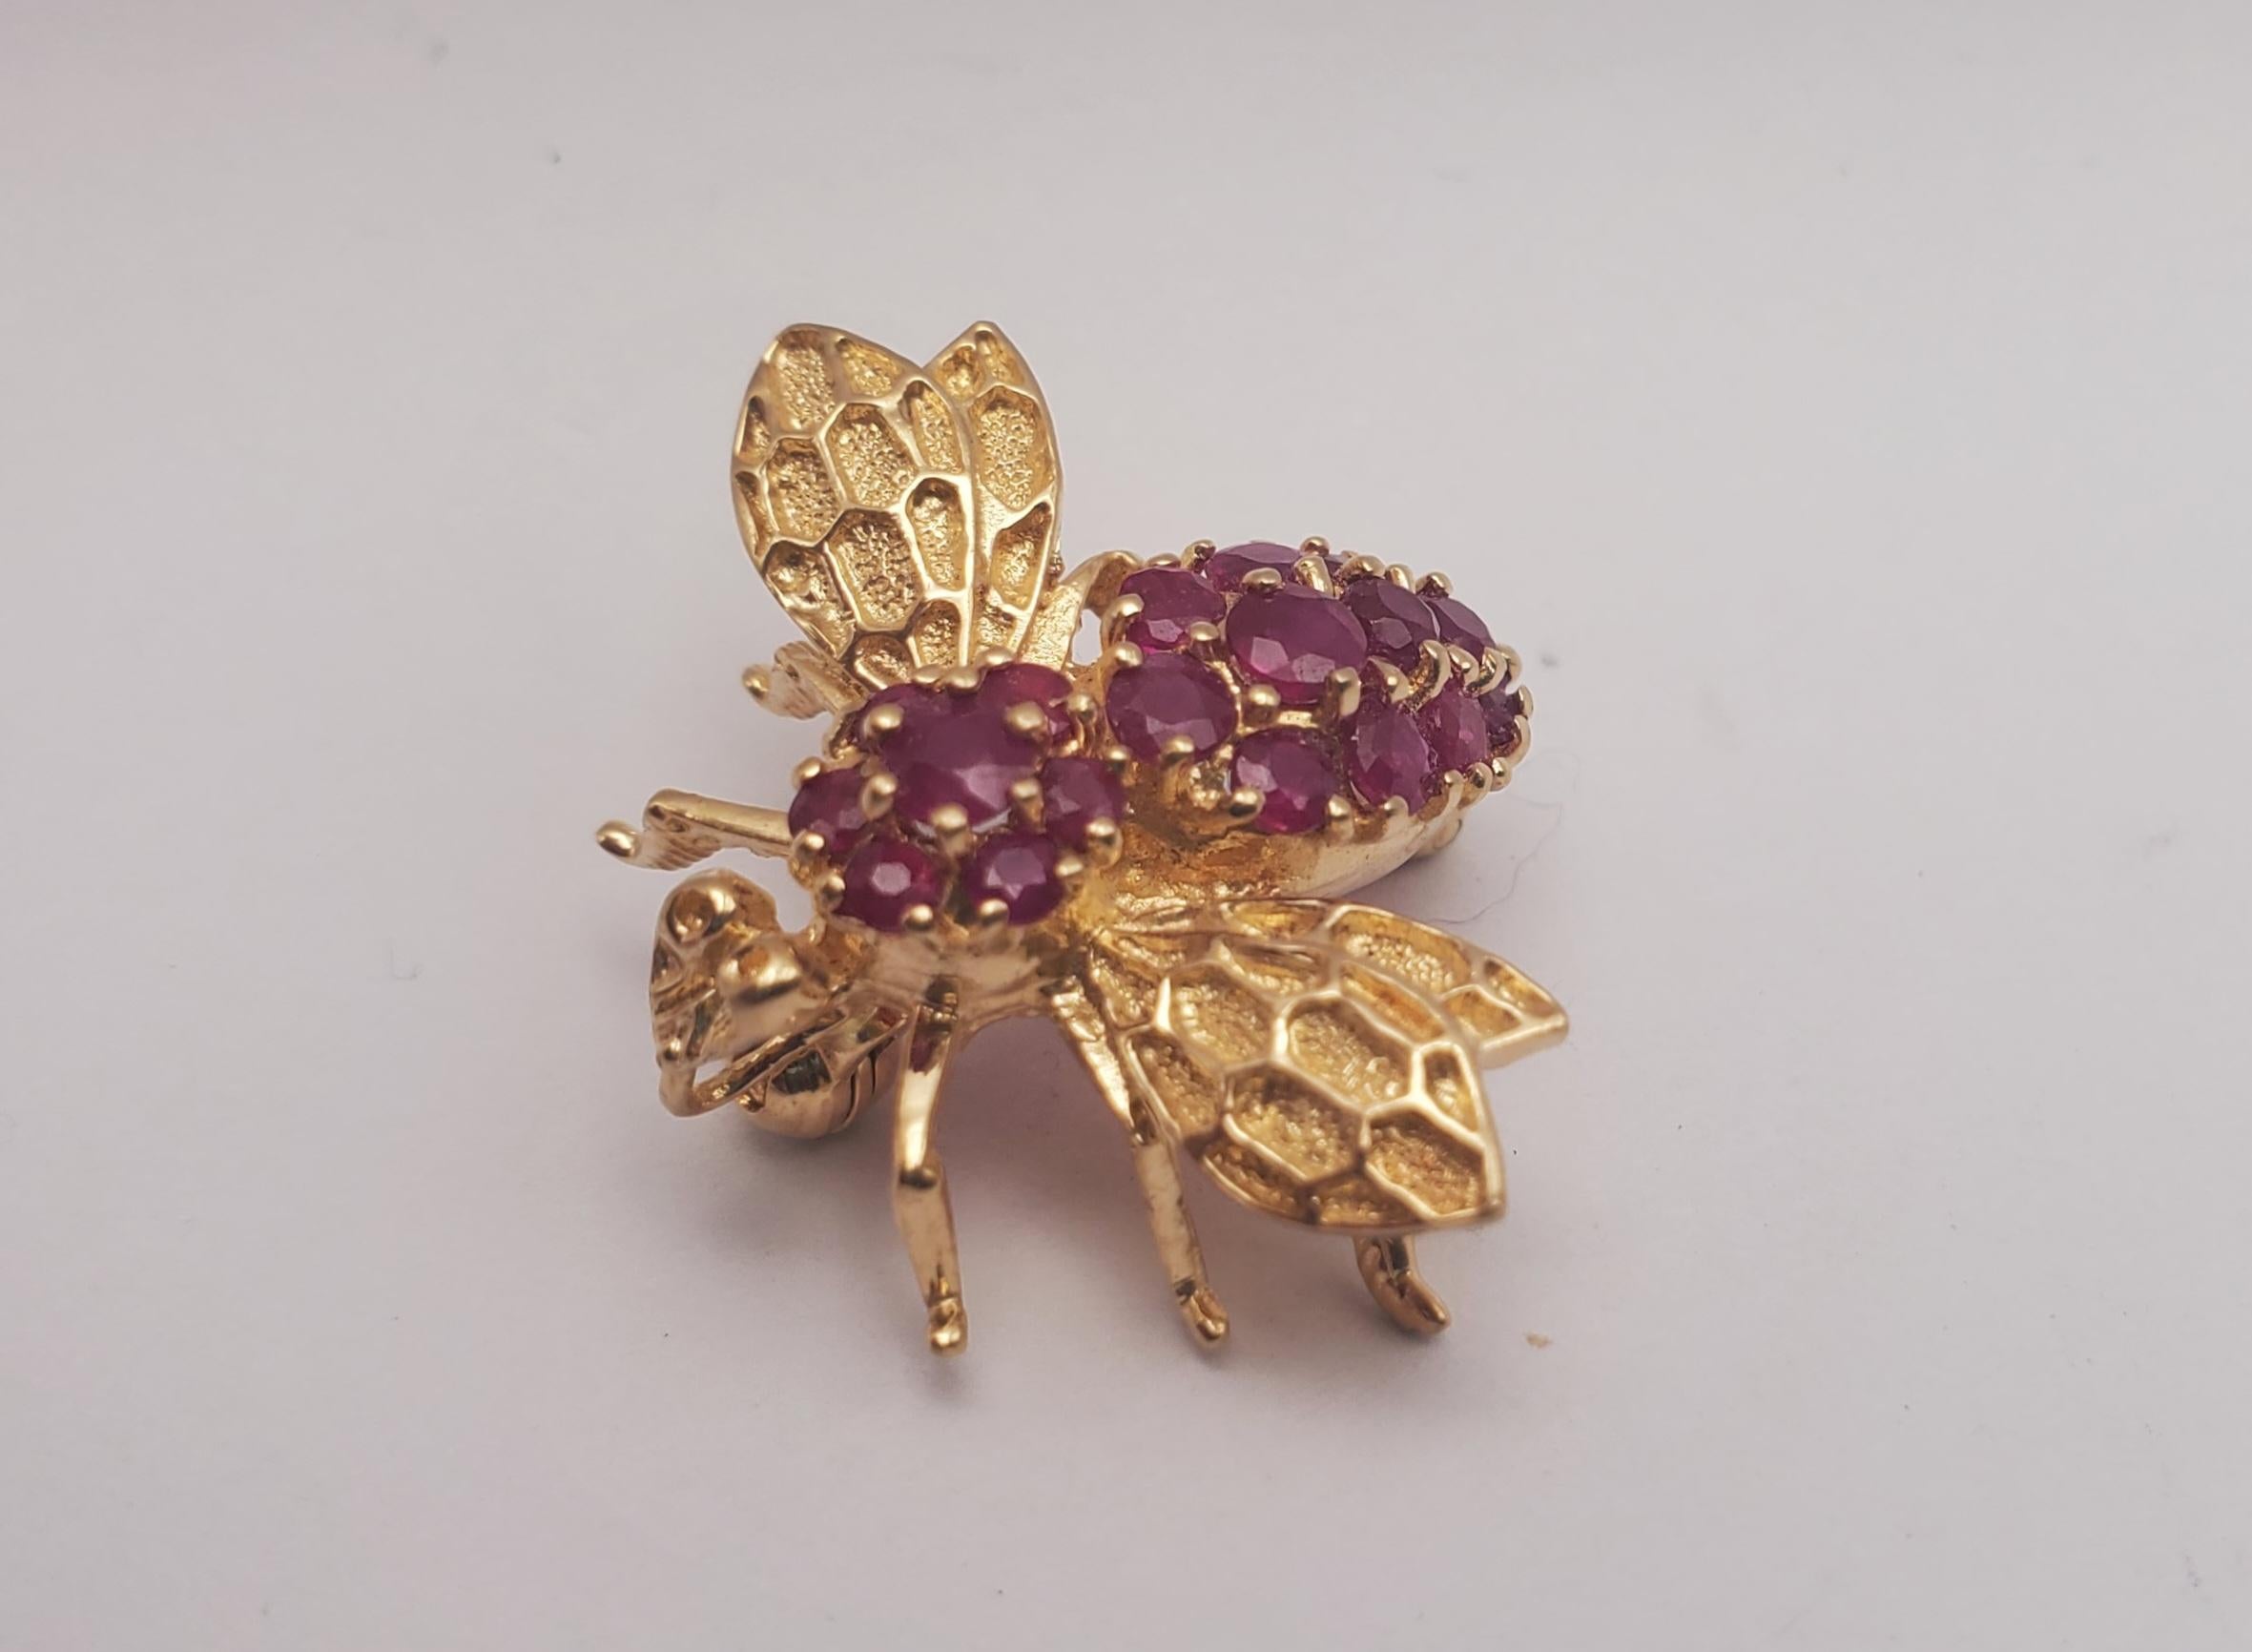 Incredibly detailed and darling bee pin/brooch crafted from solid 14k yellow gold. The piece features a bee insect design that is set with (20) fine quality rubies across its back. The round brilliant cut stones bring such an eye-catching quality to